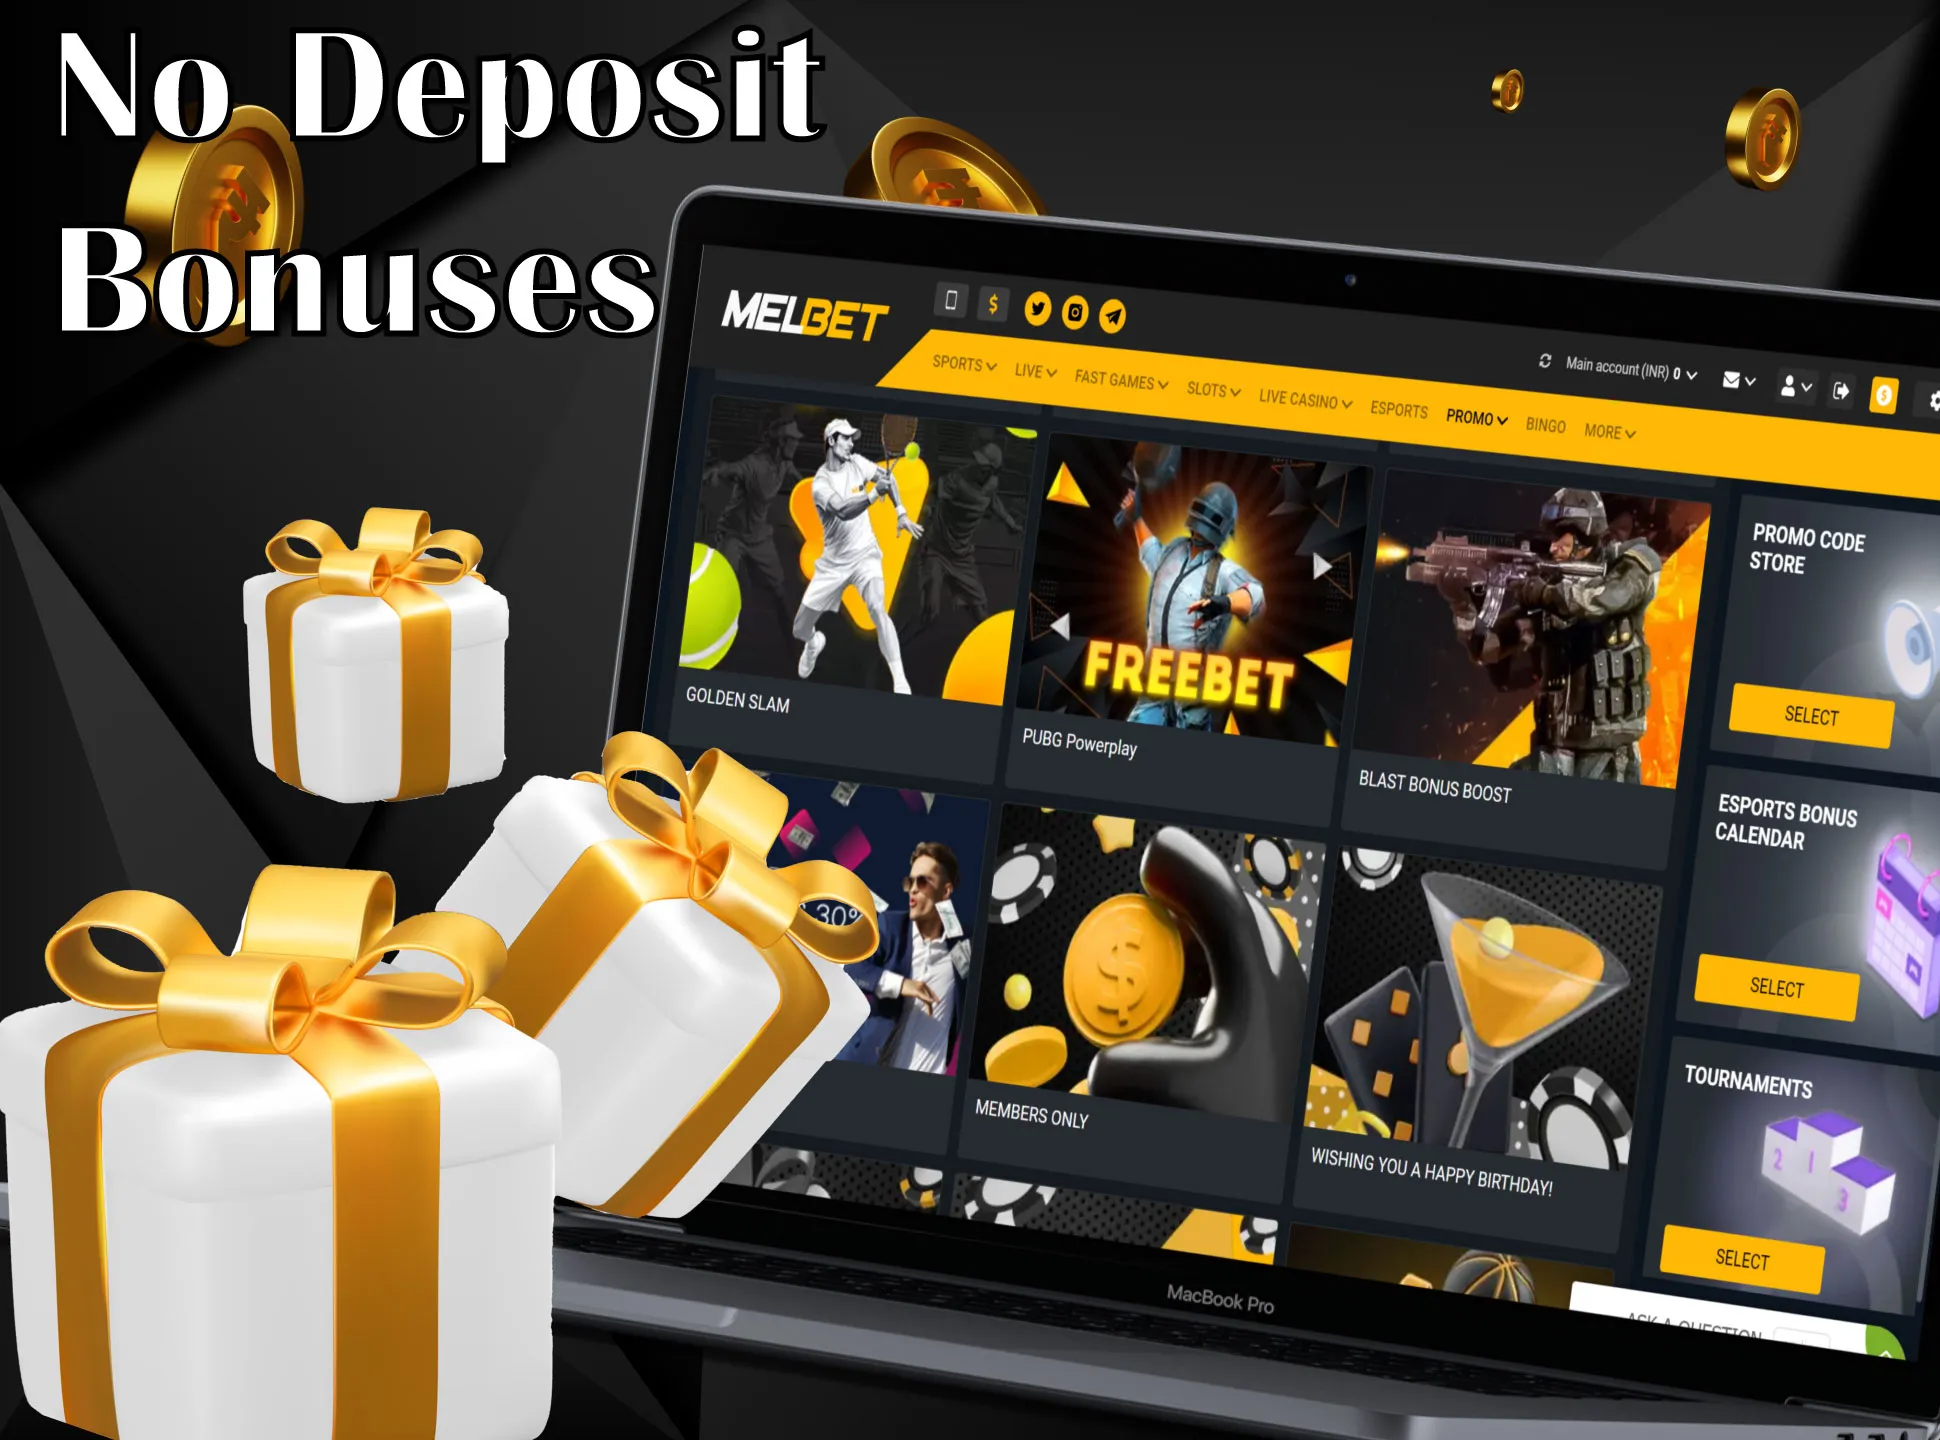 No deposit bonuses mean that you don't have to deposit any money to get a bonus.